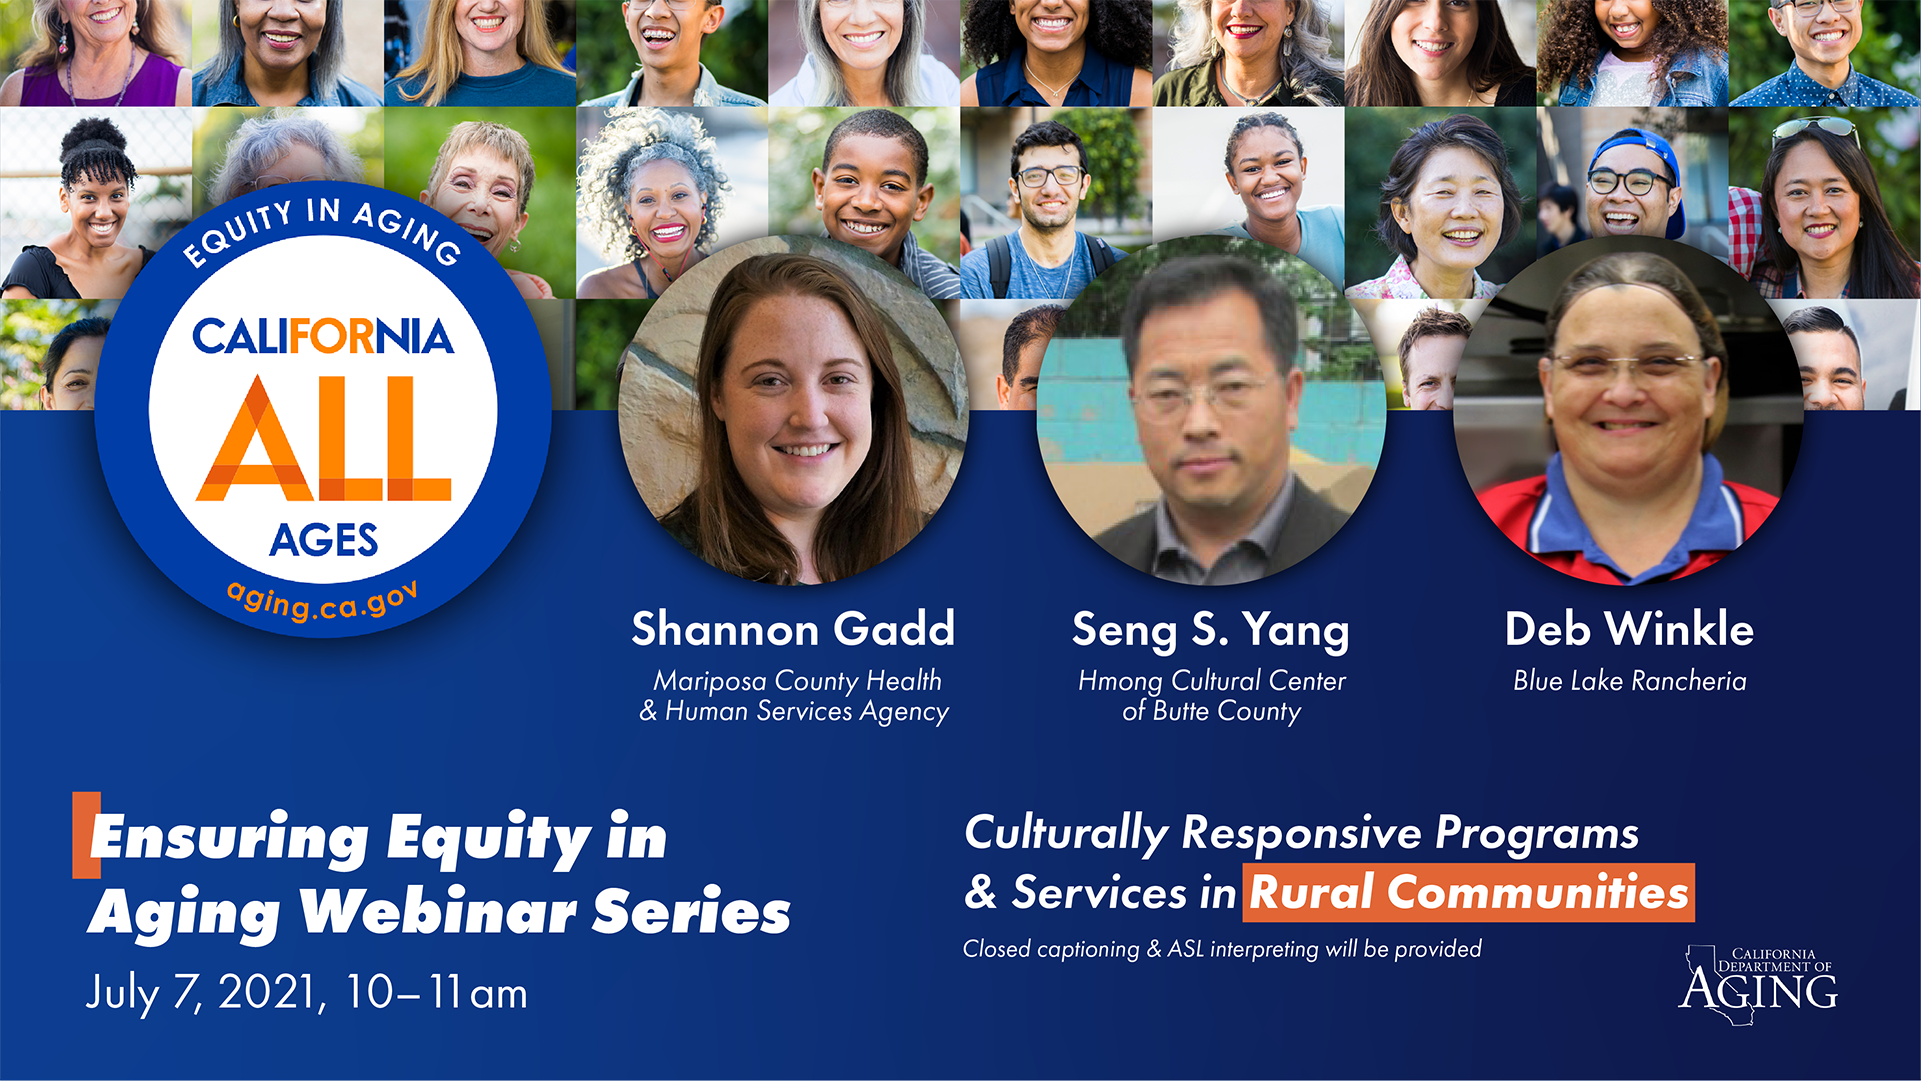 Graphic text and images. Ensuring Equity in Aging Webinar Series; Culturally Responsive Programs and Services in Rural Communities; July 7, 2021, 10 to 11 am. Includes a background collage of diverse older adults; the California for All Ages, Equity in Aging logo is overlayed to the left. To the right, there are three headshots of the featured presenters, including Shannon Gadd from the Mariposa Health and Human Services Agency, Seng S. Yang of the Hmong Cultural Center in Butte County, and Deb Winkle of the Blue Lake Rancheria tribe. The Department of Aging logo is visible in the bottom right-hand corner.